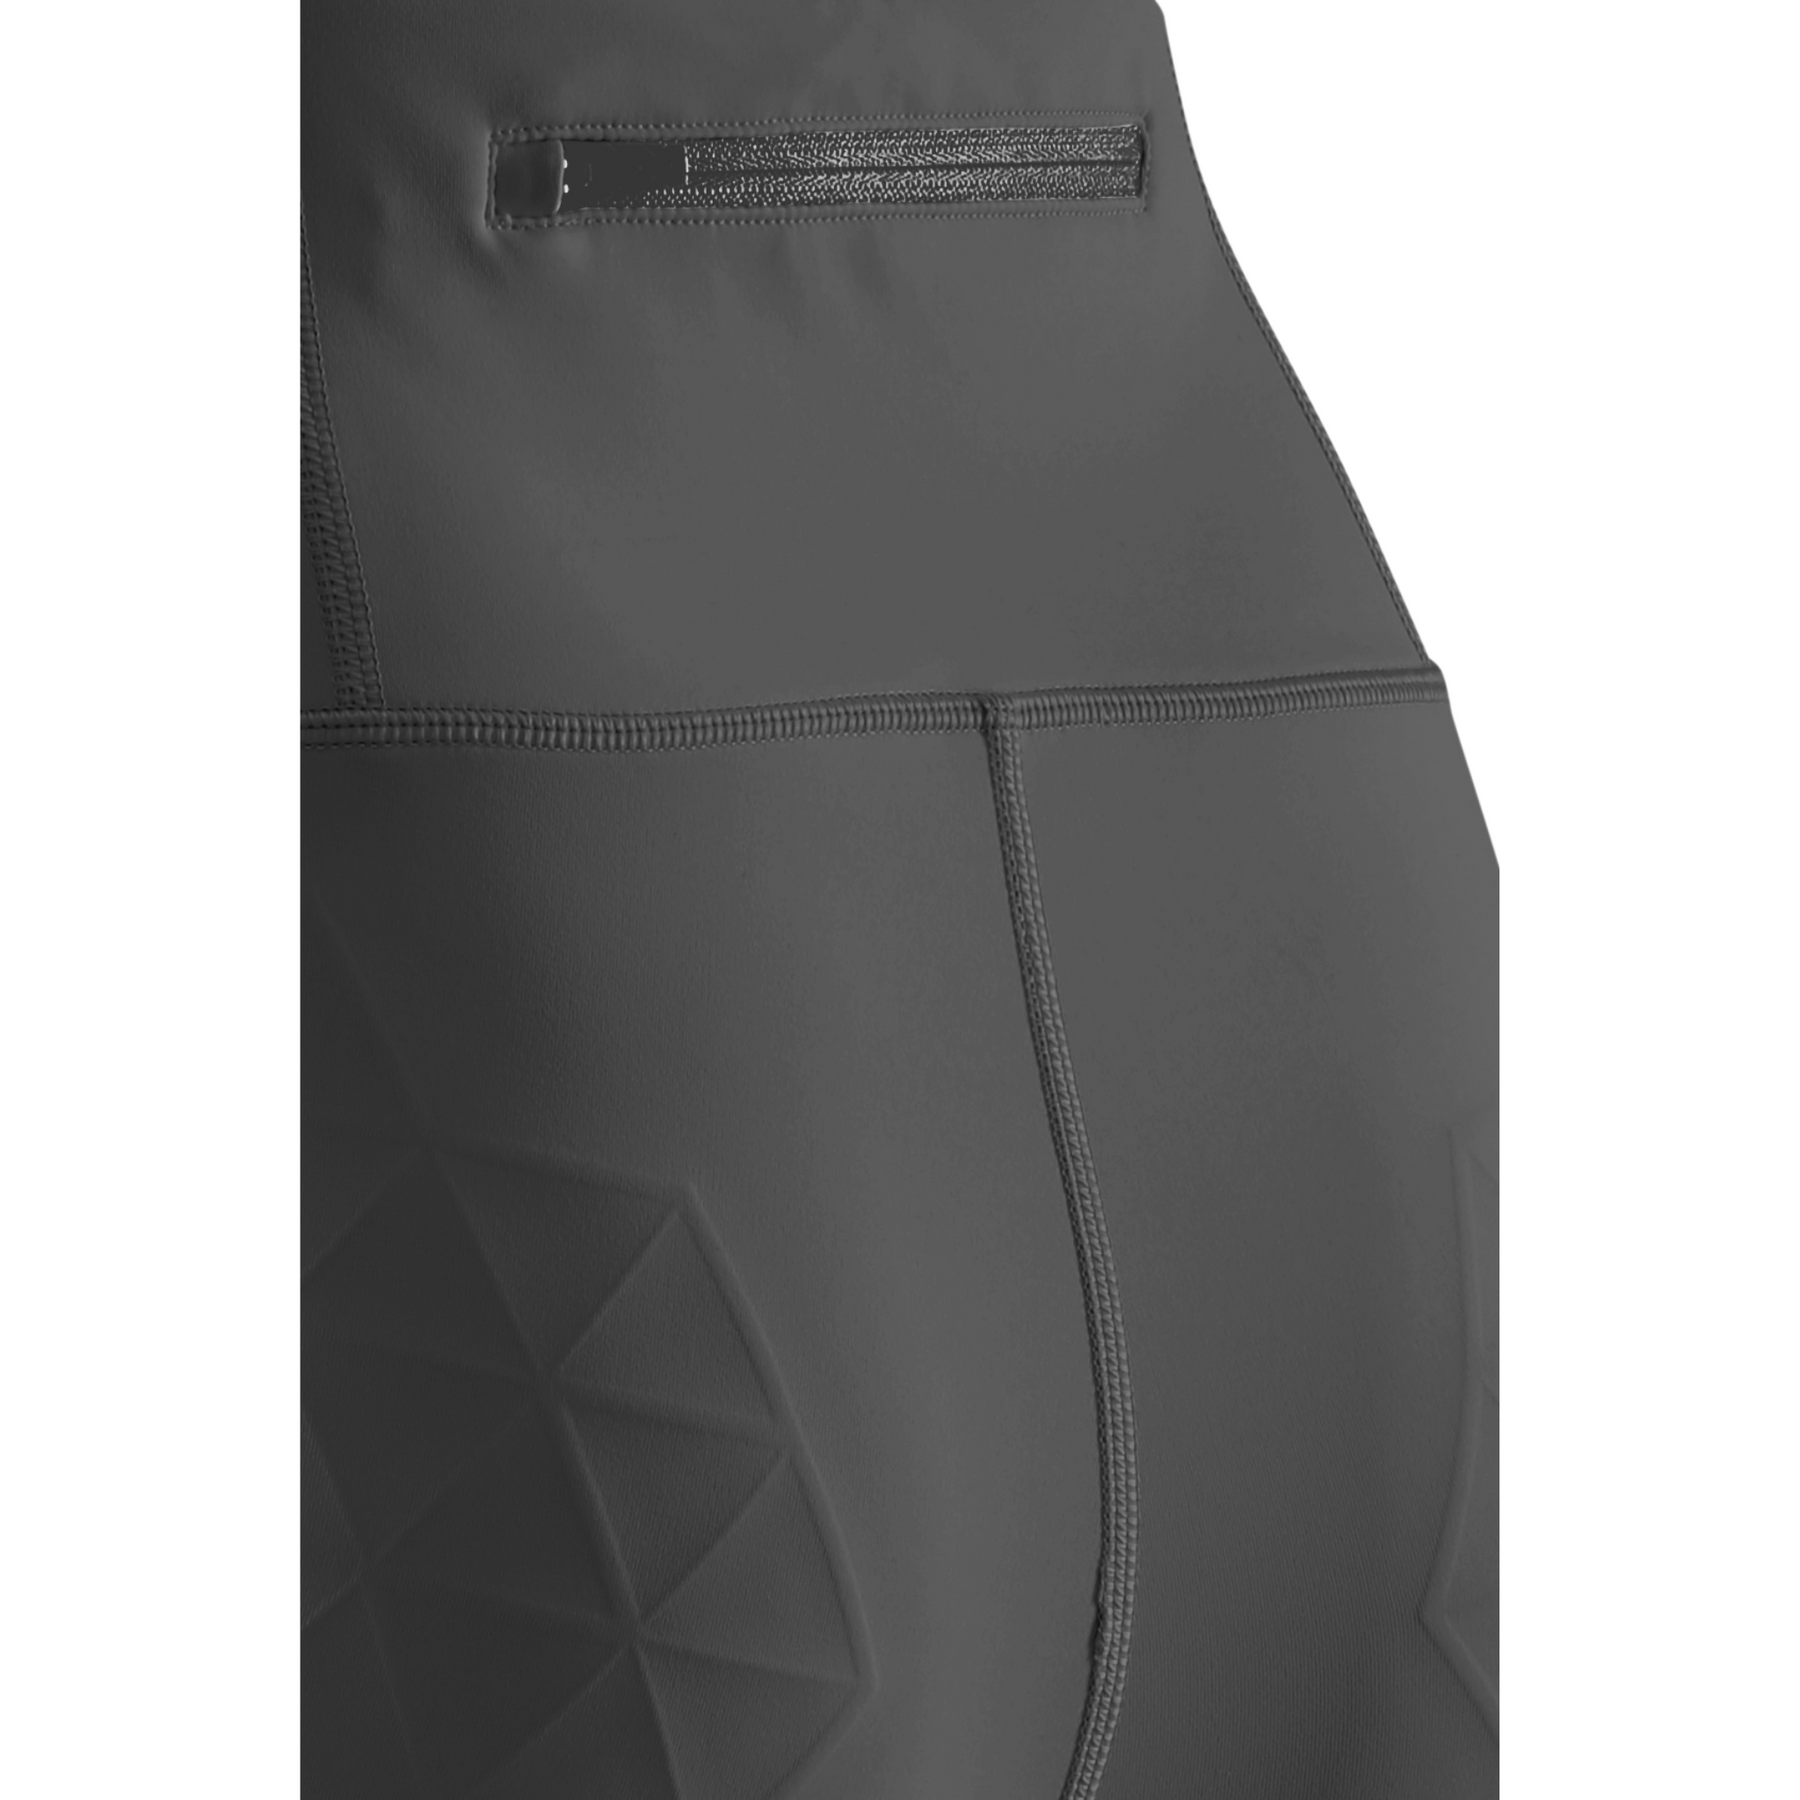 Run Support Shorts for Women  CEP Activating Compression Sportswear – CEP  Compression